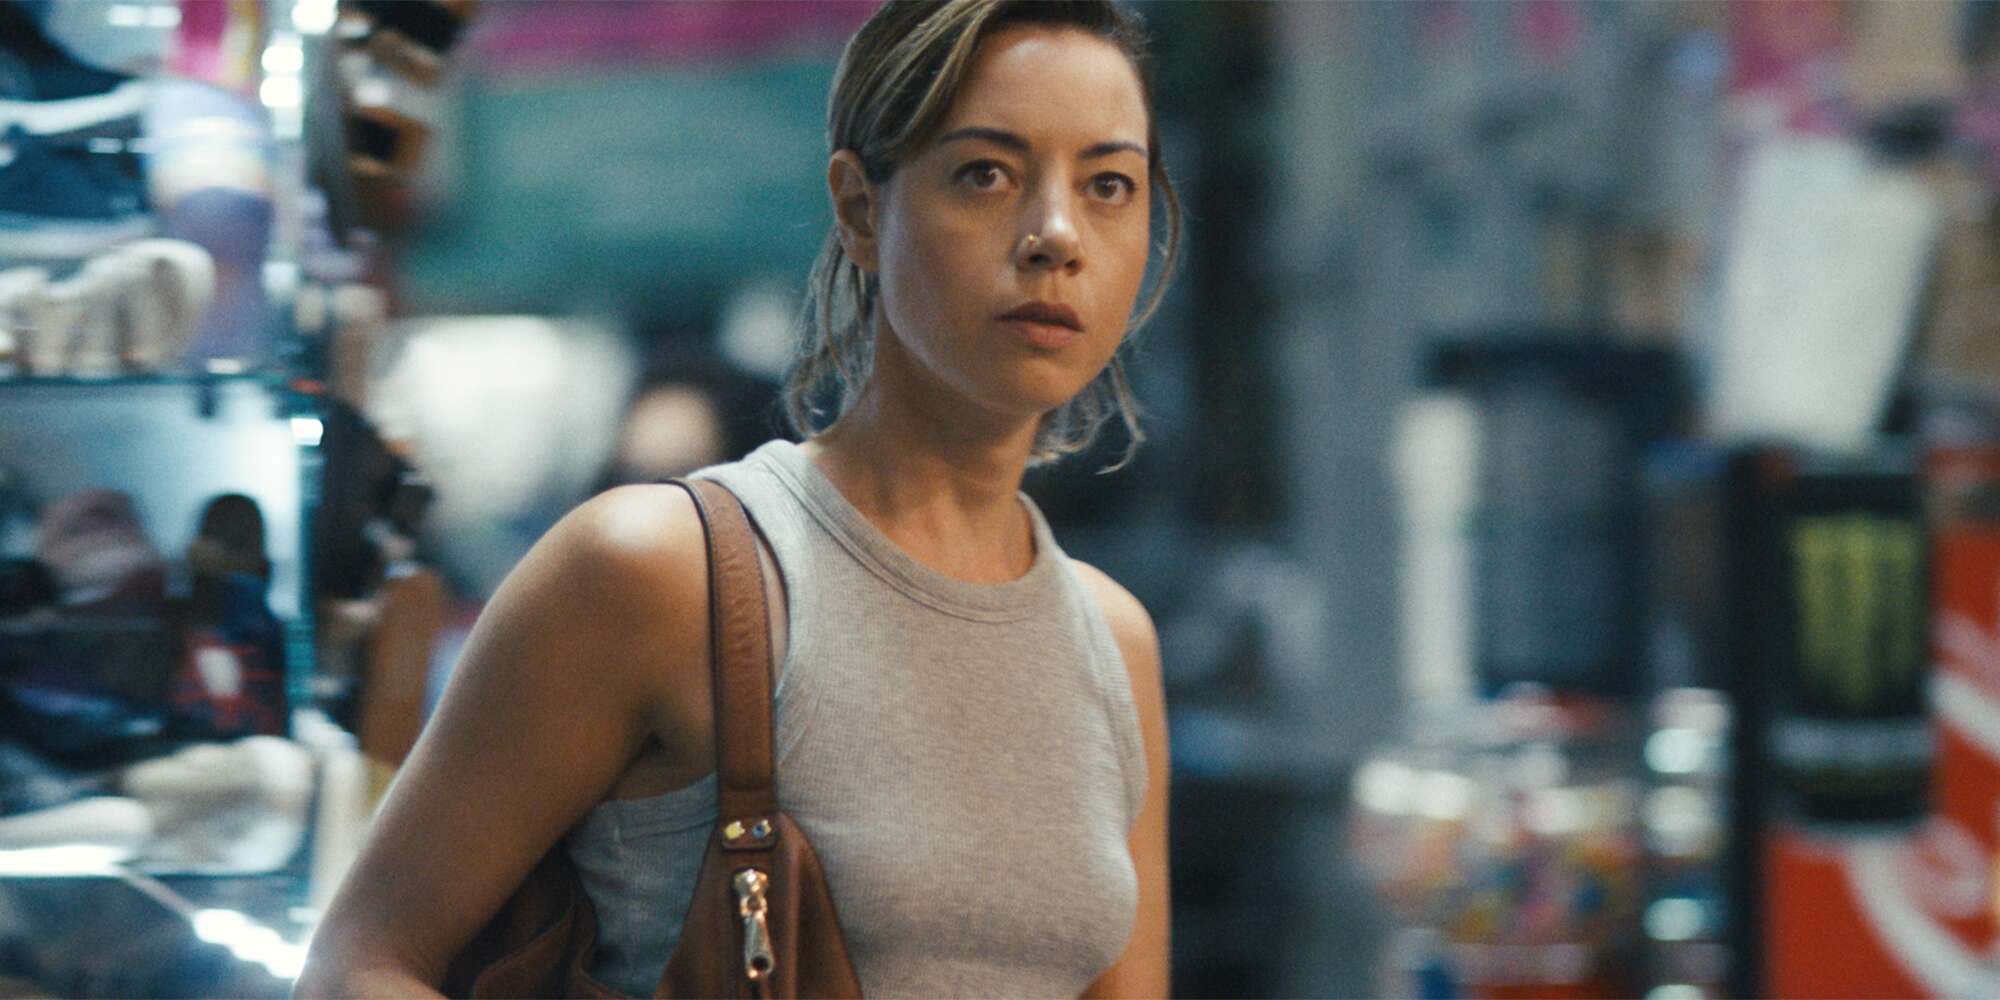 Aubrey Plaza on why her new thriller Emily the Criminal felt like pulling off a scam